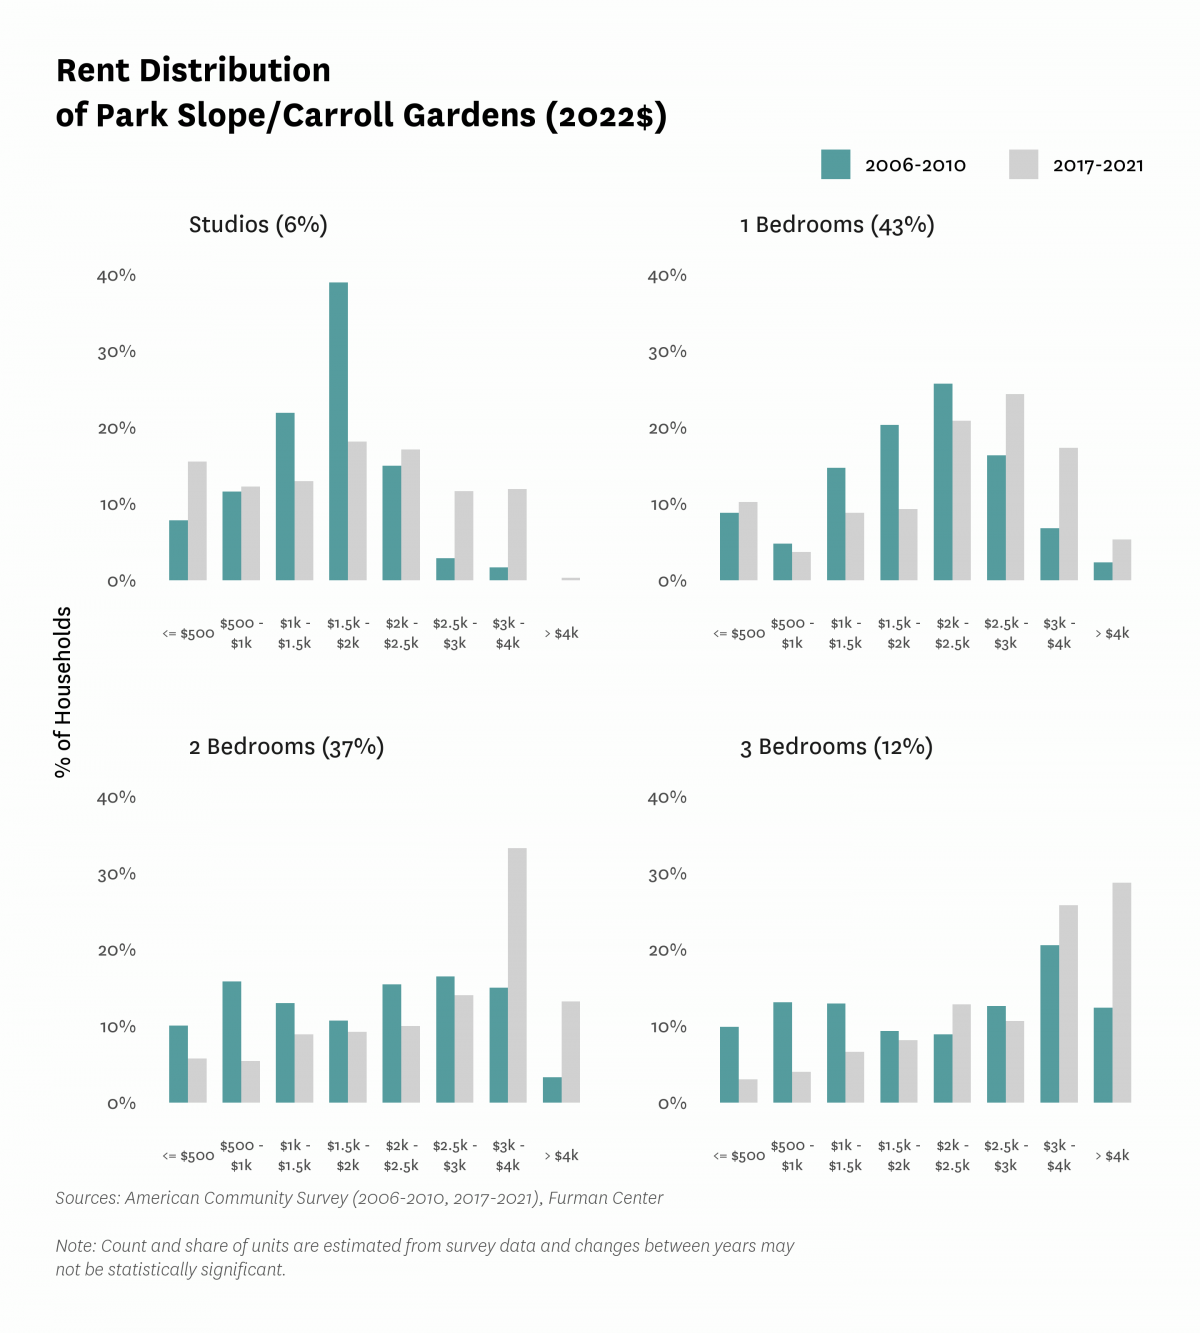 Graph showing the distribution of rents in Park Slope/Carroll Gardens in both 2010 and 2017-2021.